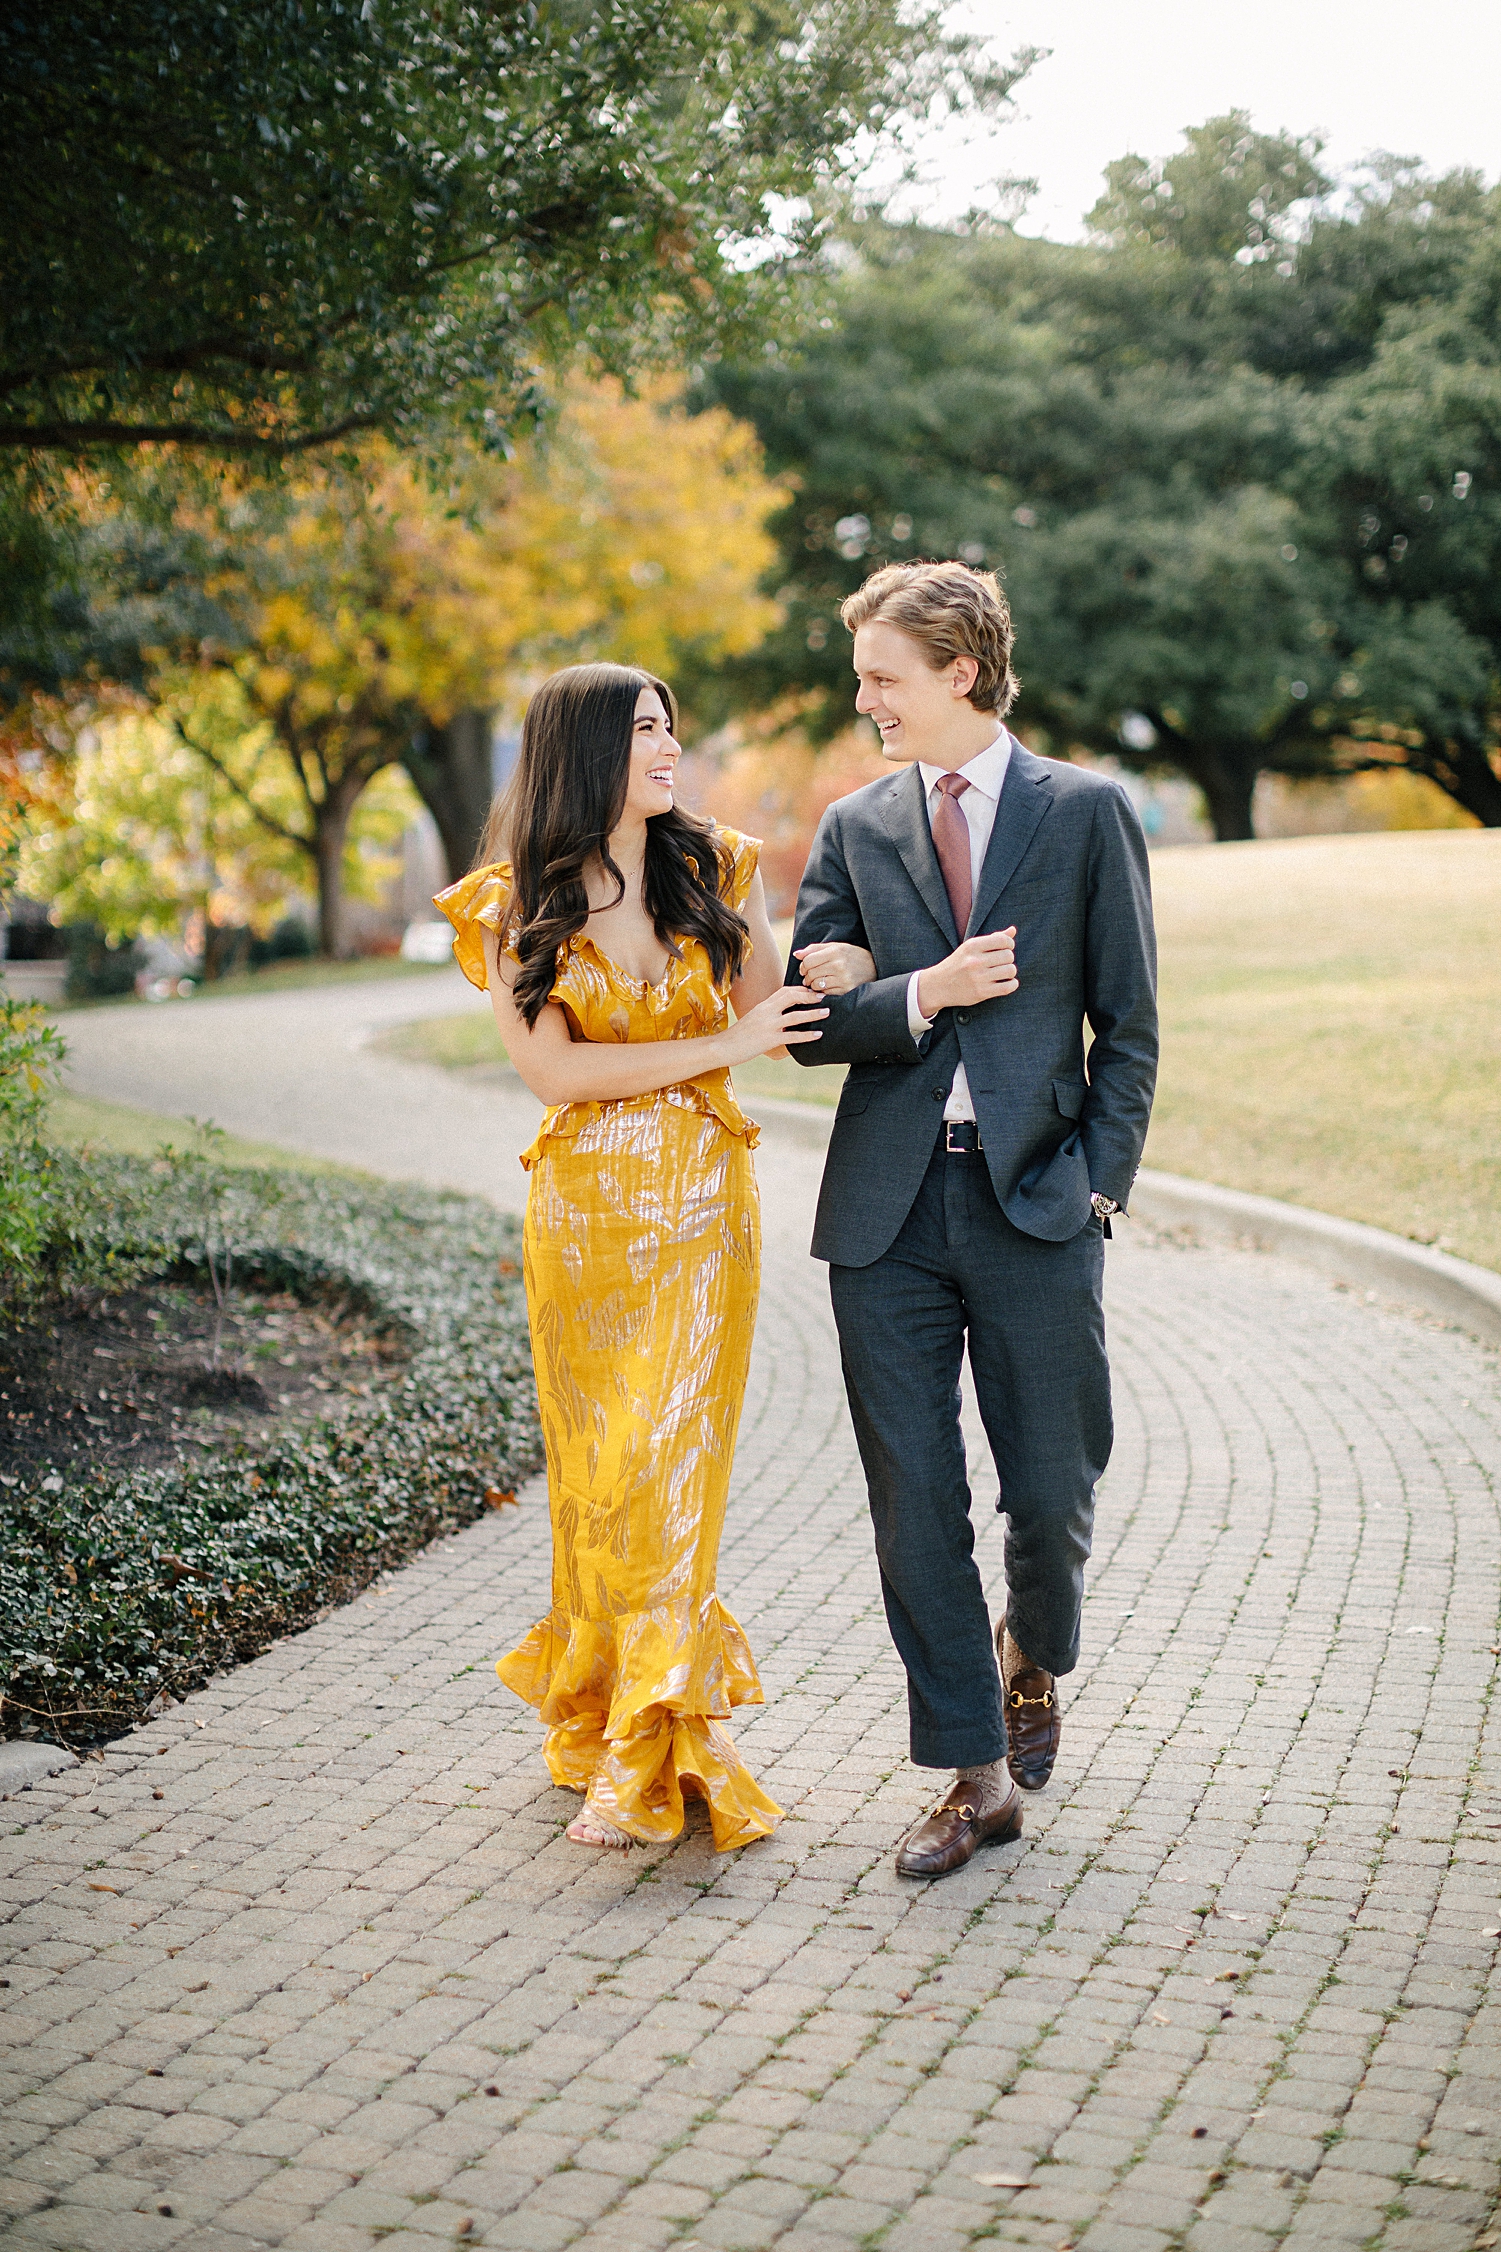 brunette girl in yellow dress walking with man in suit